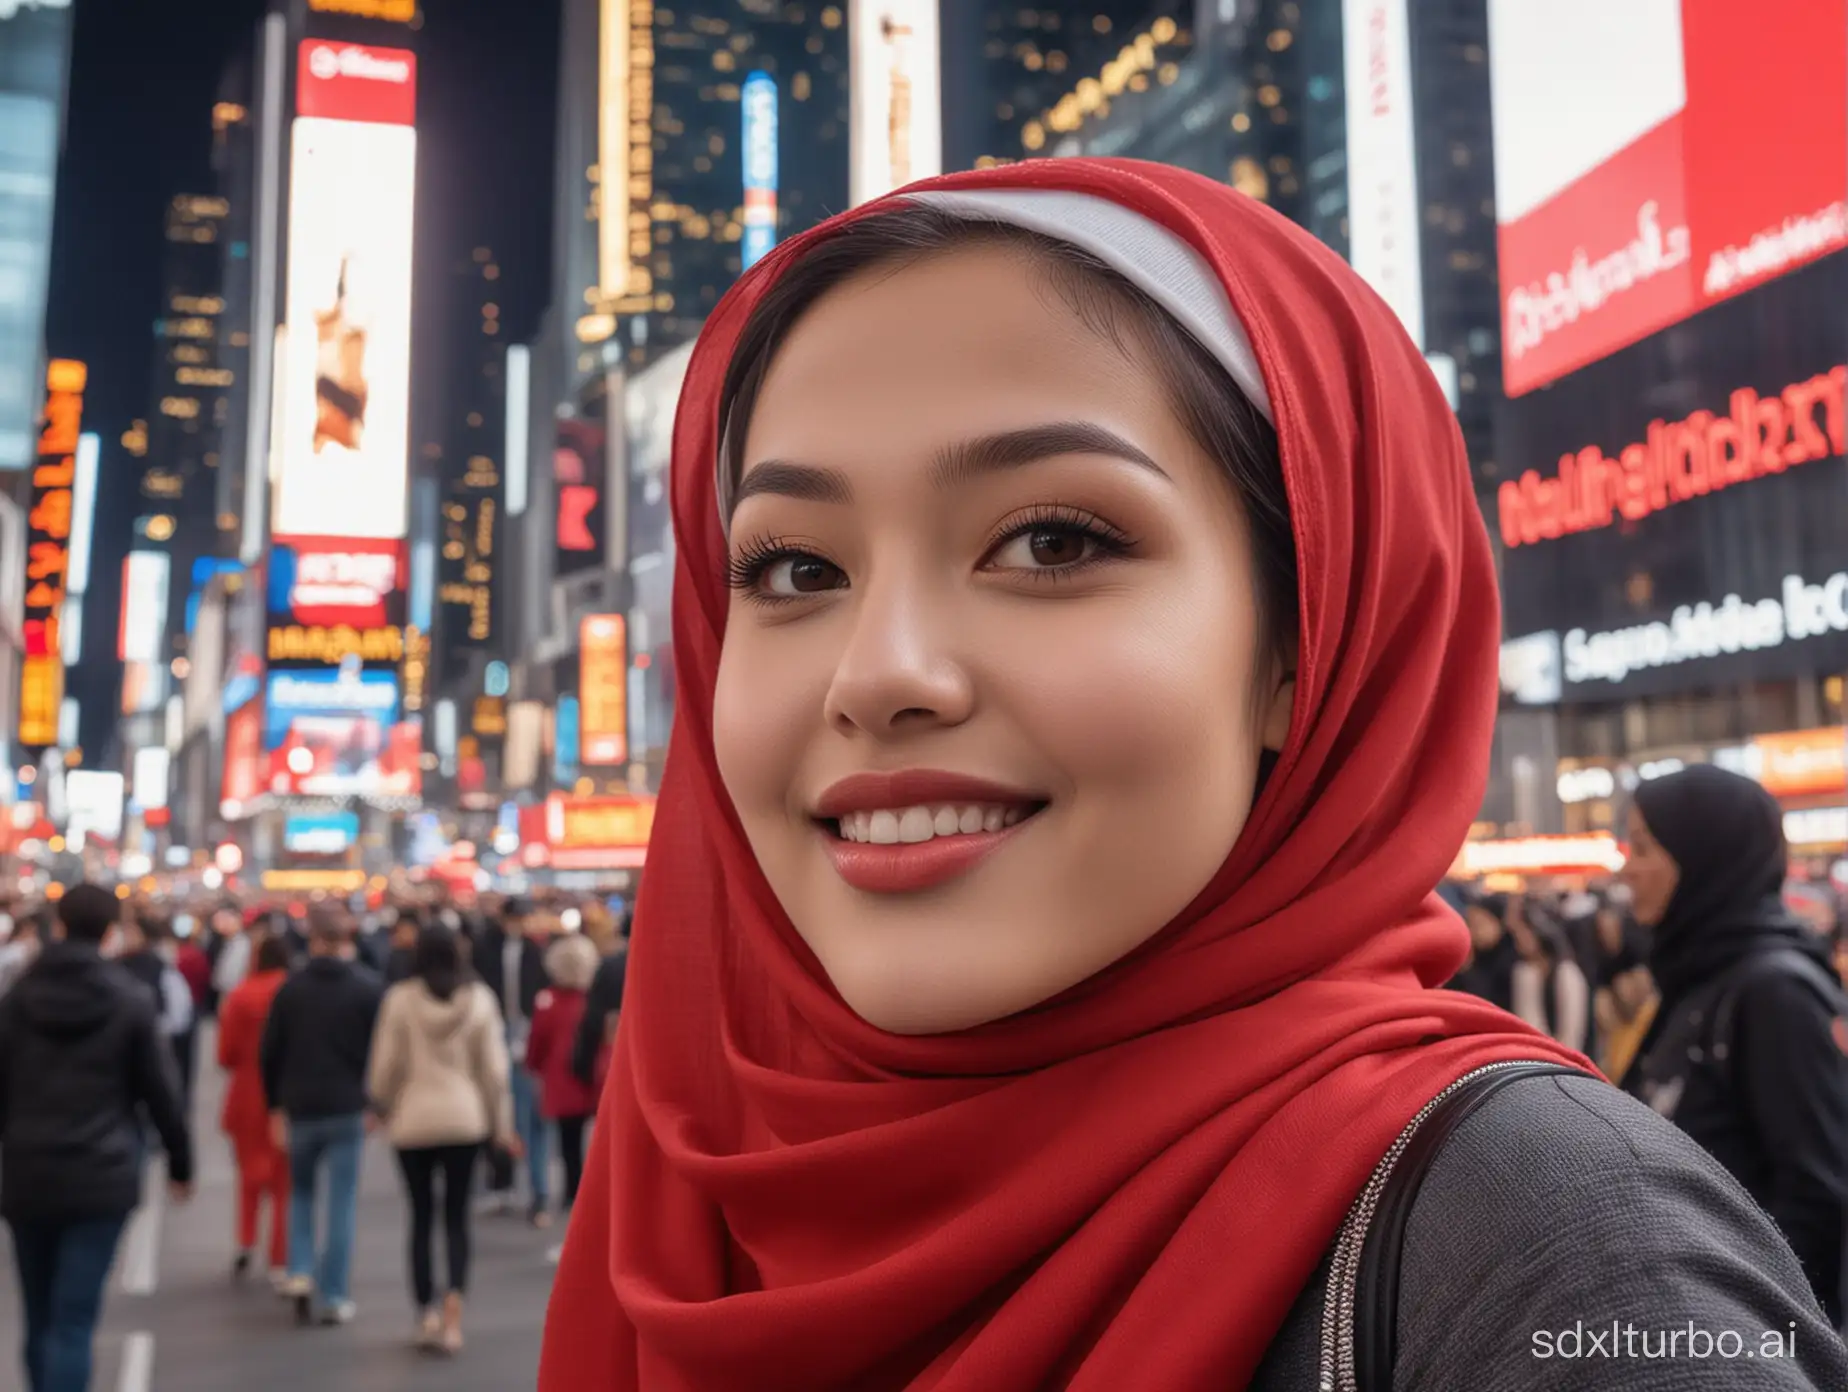 Radiant-Thai-Girl-Smiling-in-Red-Hijab-at-New-York-Times-Square